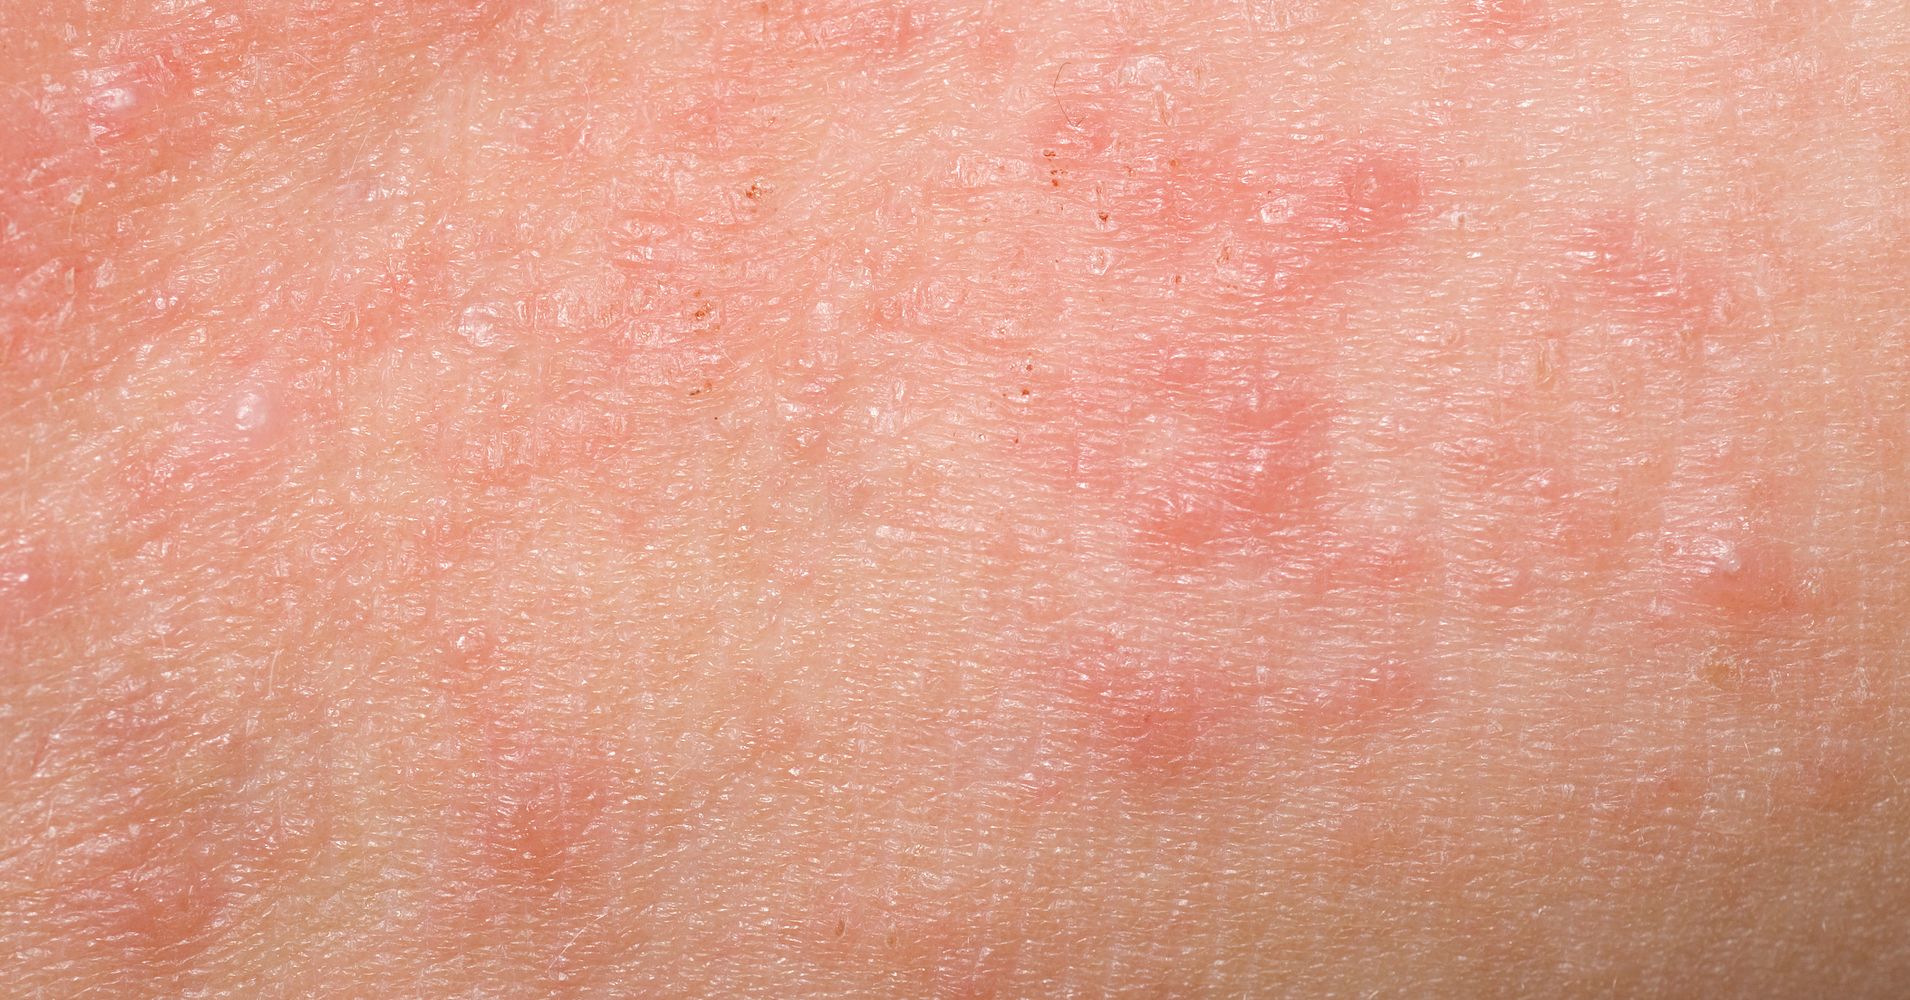 What Is Keratosis Pilaris, And Why Does It Look Like Body Acne